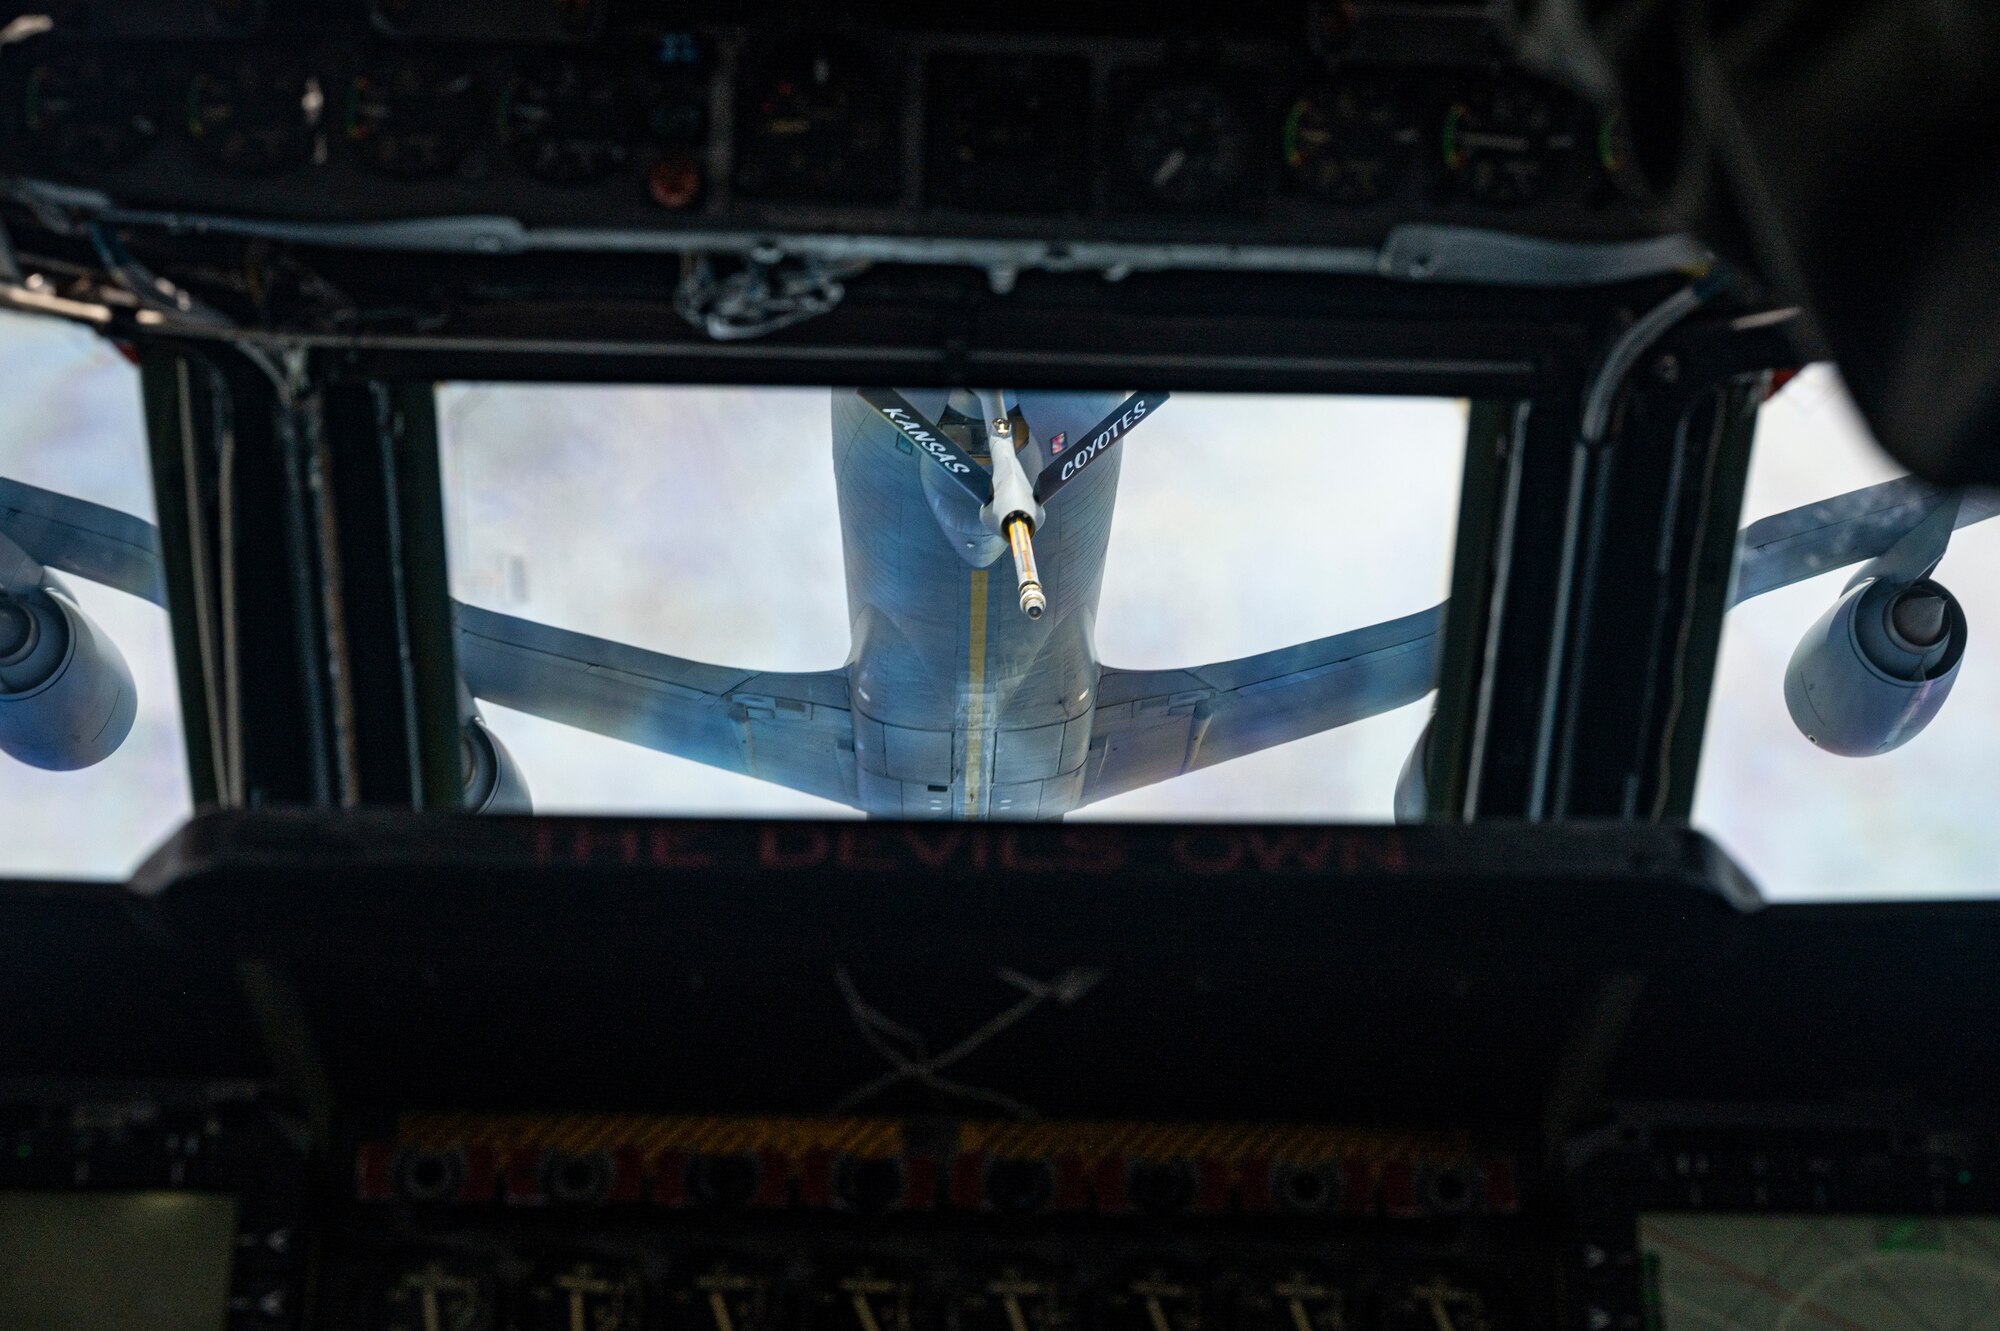 A U.S. Air Force KC-135 Stratotanker, assigned to the 117th Air Refueling Squadron, Kansas Air National Guard, prepares to refuel a B-52H Stratofortress, assigned to the 2nd Bomb Wing, Barksdale Air Force Base, Louisiana, over the Indo-Pacific region, during a Bomber Task Force mission, Sept. 14, 2021. The B-52 is a long range bomber with a range of approximately 8,800 miles, enabling rapid support of Bomber Task Force missions or deployments and reinforcing global security and stability. (U.S. Air Force photo by Staff Sgt. Devin M. Rumbaugh)